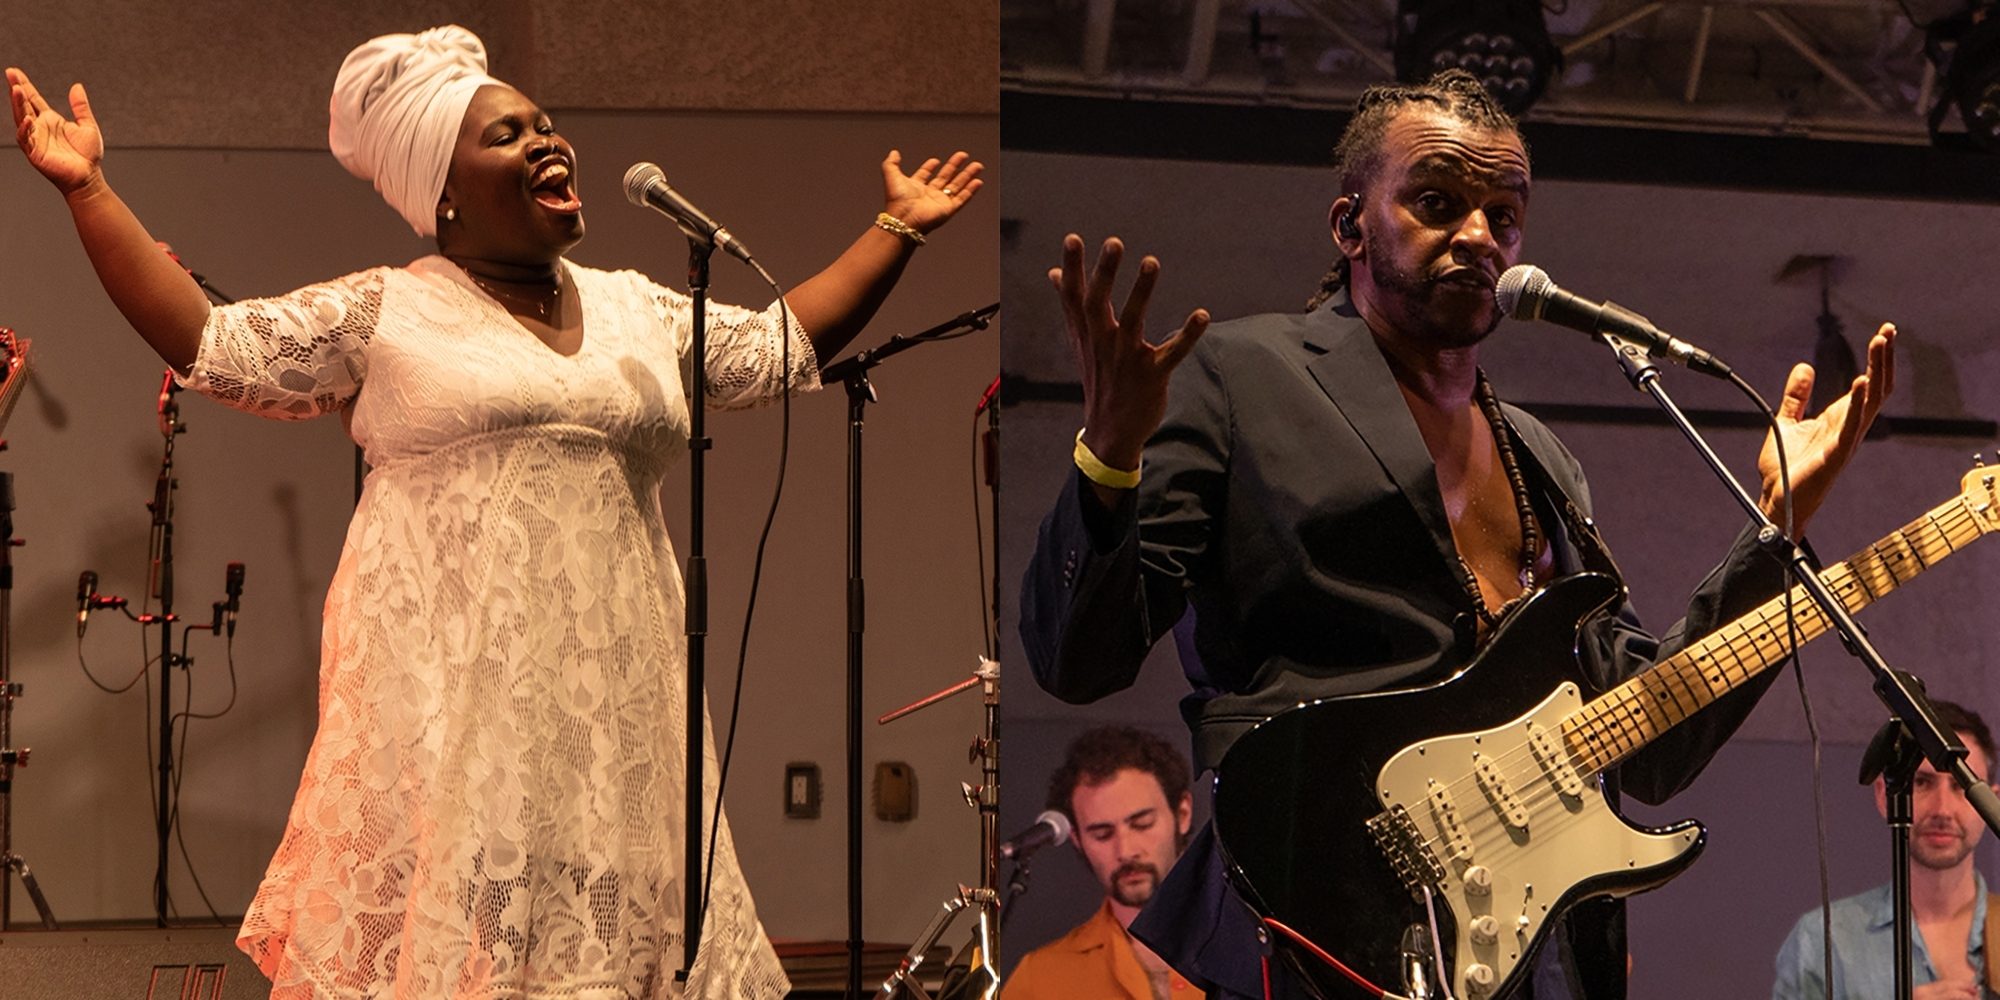 Afro-Roots Fest 2022 with Daymé Arocena and Sinkane